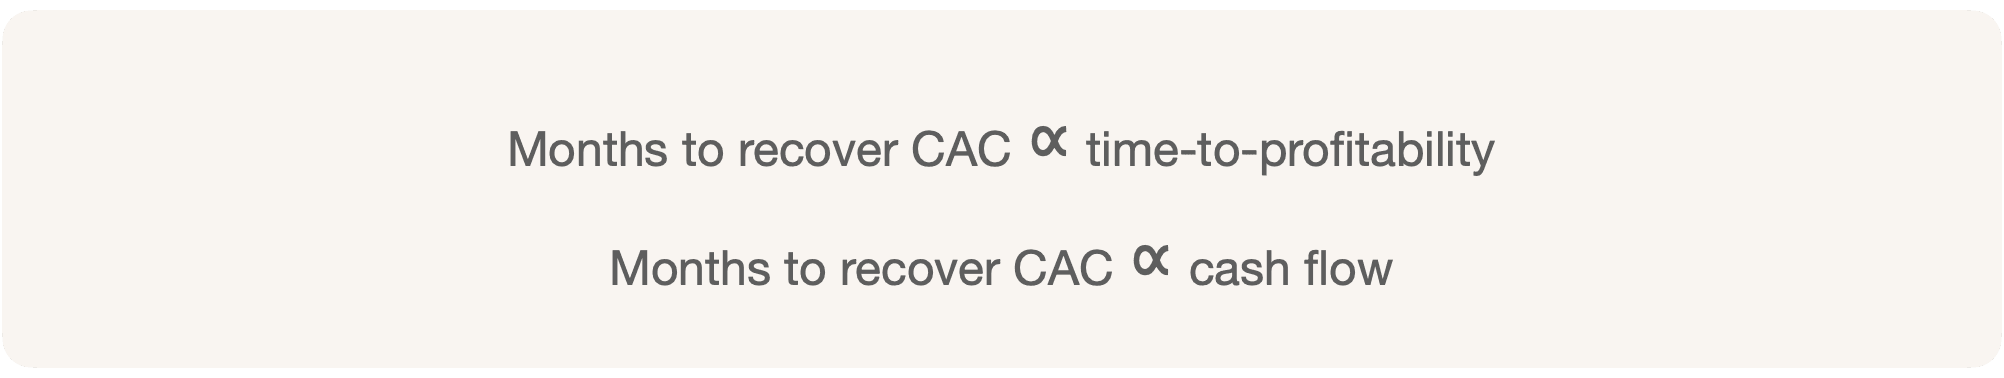 Months to recover CAC is directly proportional to time-to-profitability and cash-flow